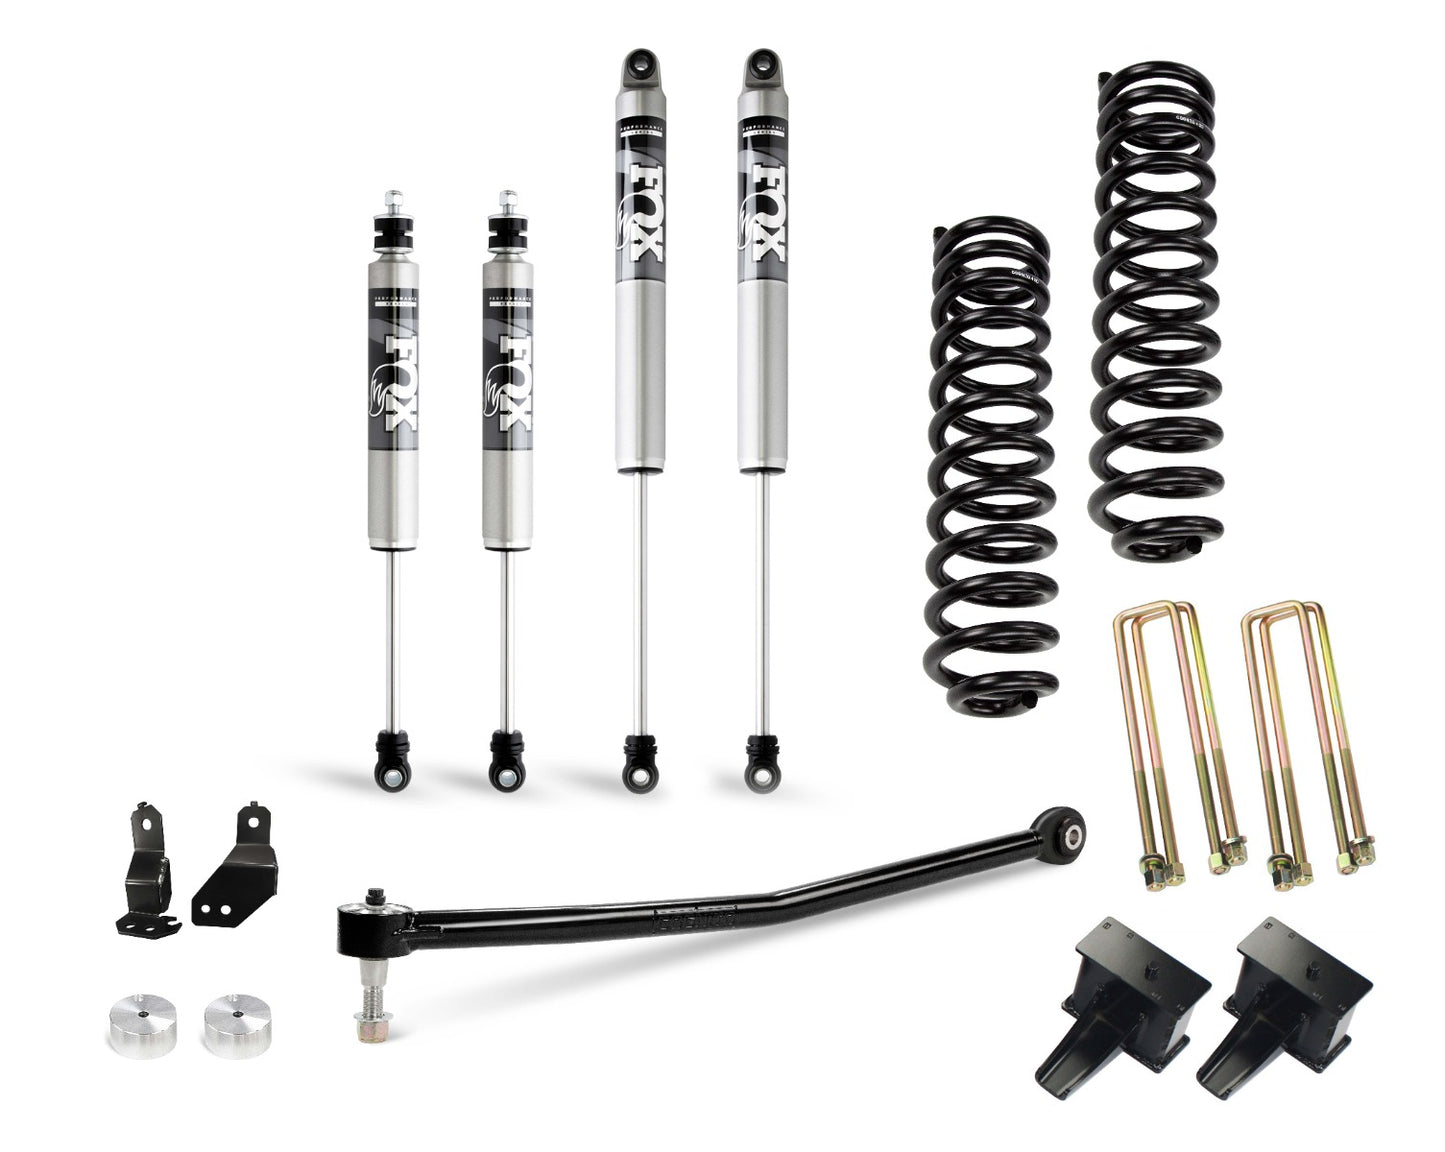 Cognito 3-Inch Performance Lift Kit With Fox PS 2.0 IFP Shocks For 20-22 Ford F250/F350 4WD Trucks